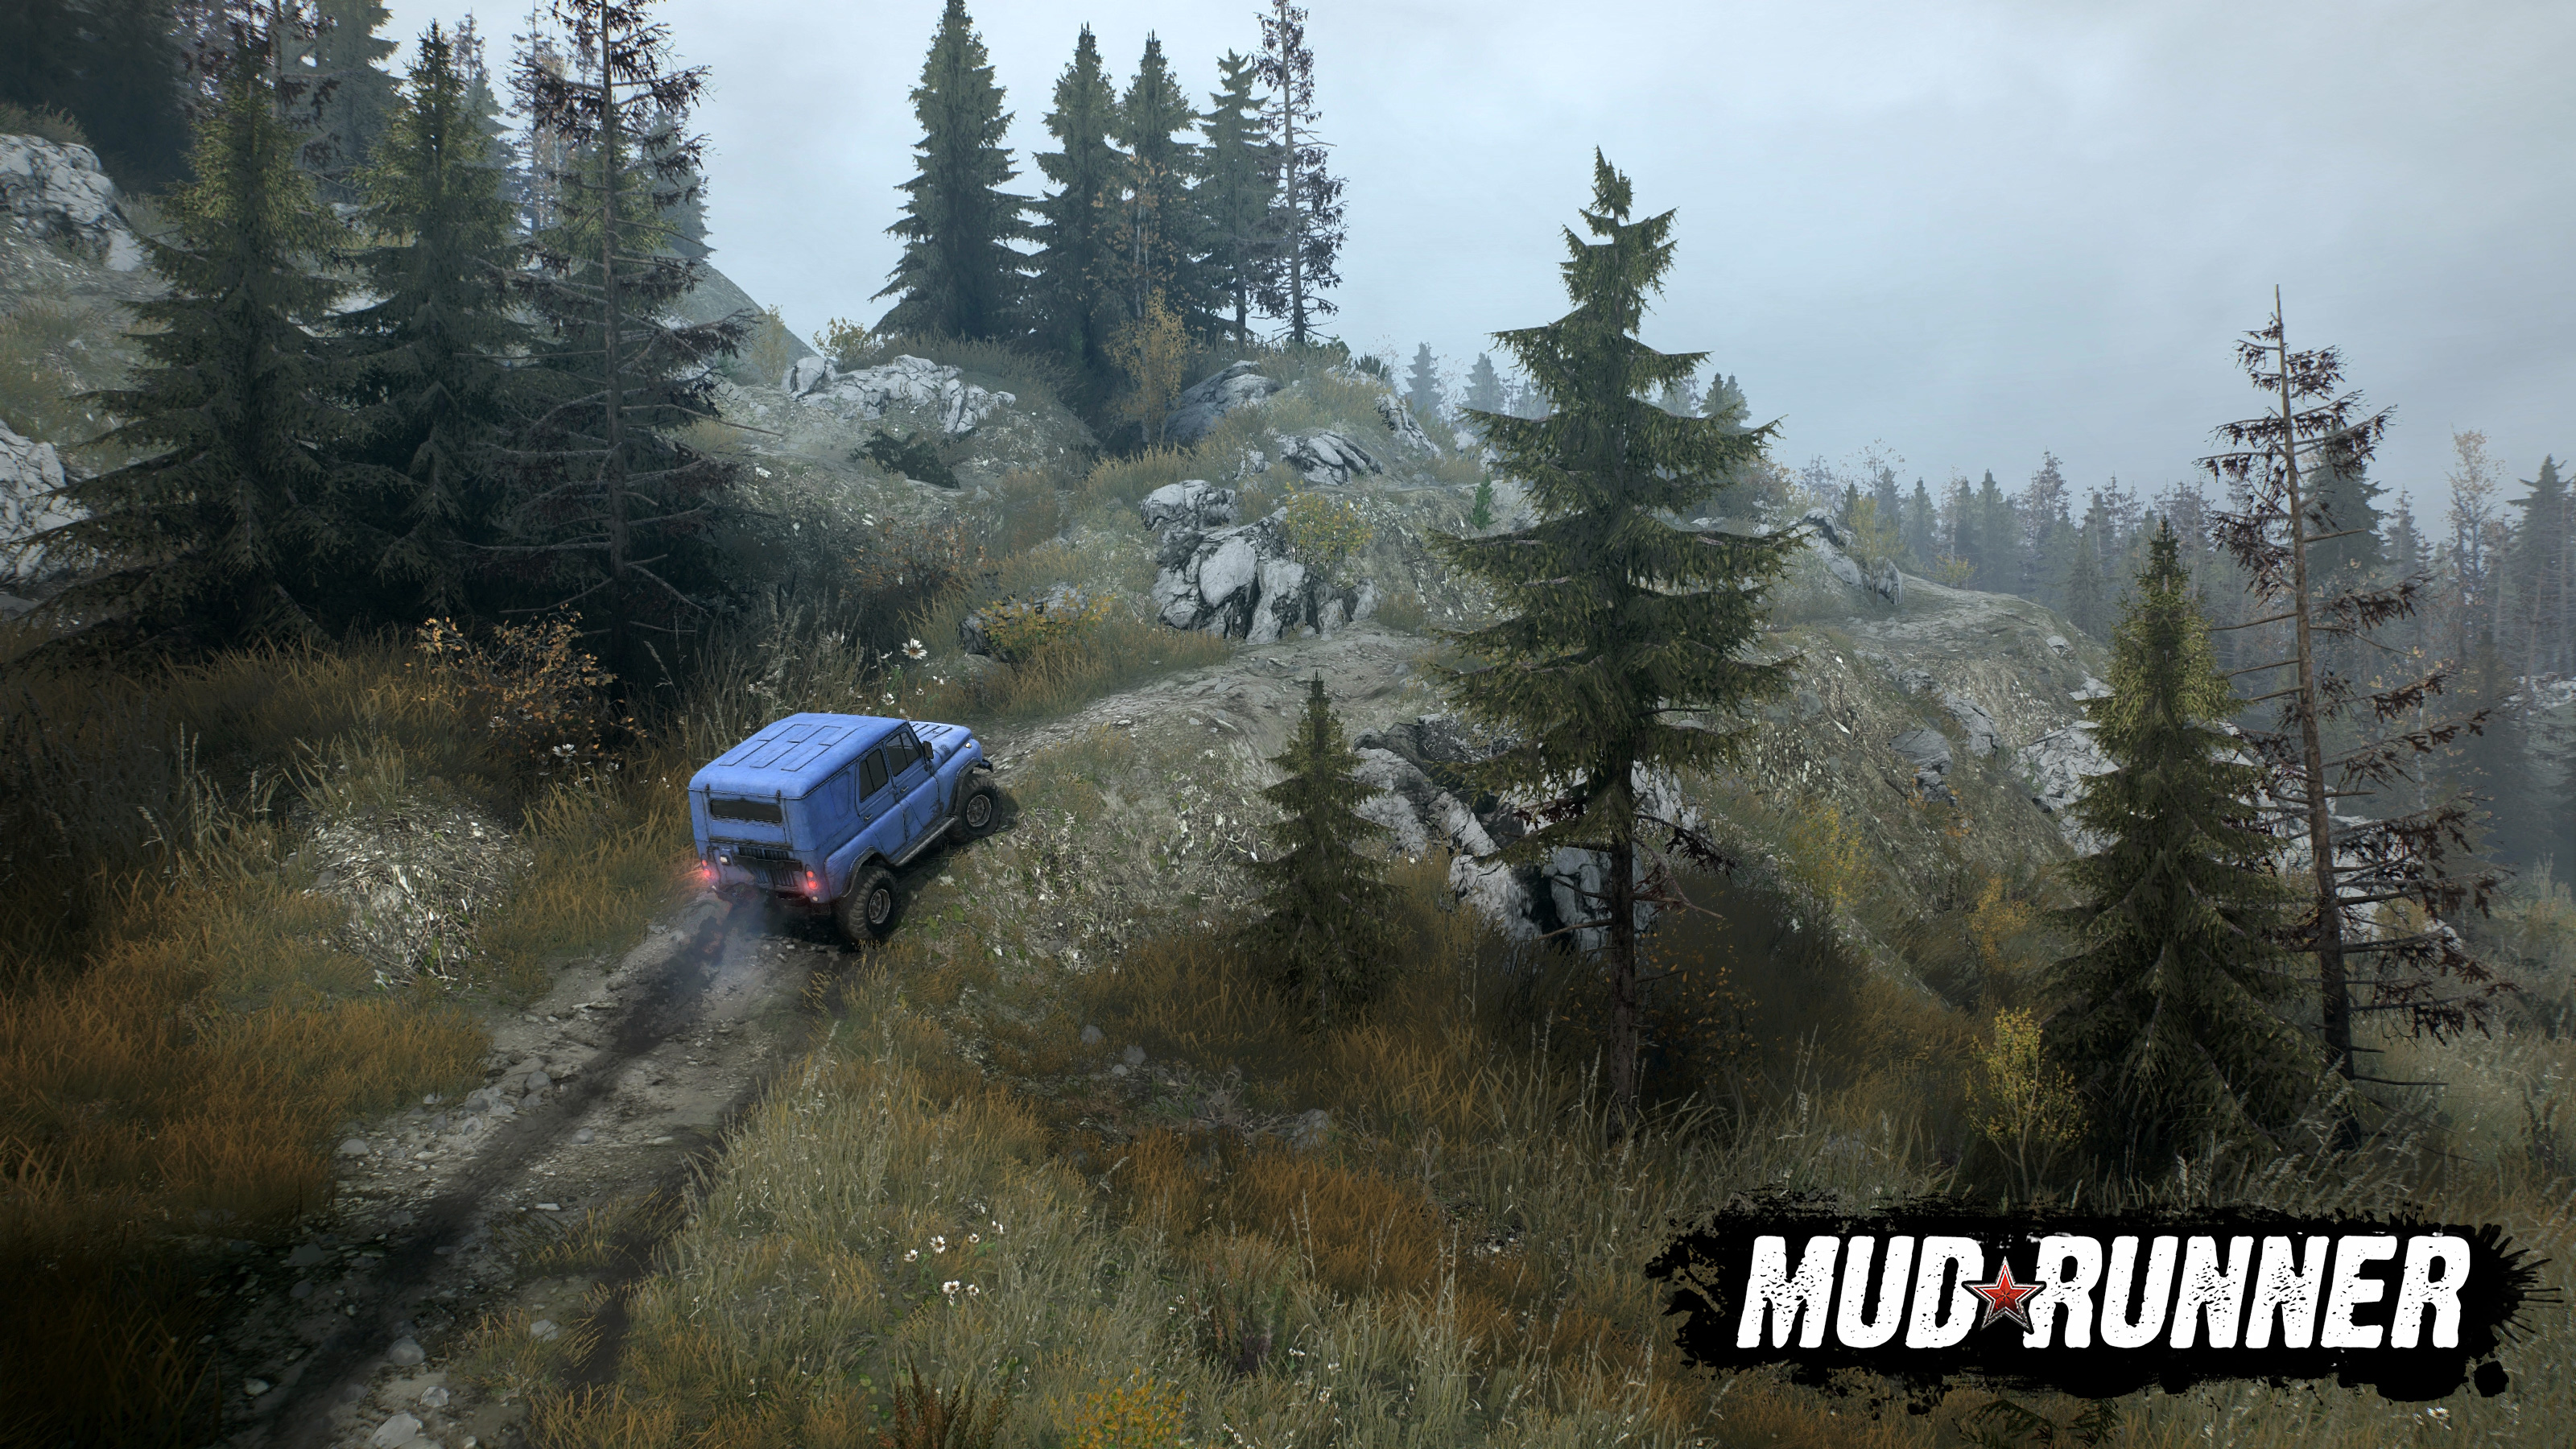 Expedition mudrunner nintendo. Spin Tires MUDRUNNER. SPINTIRES Mud Runner. A-3151 MUDRUNNER. SPINTIRES: MUDRUNNER American Wilds Edition.